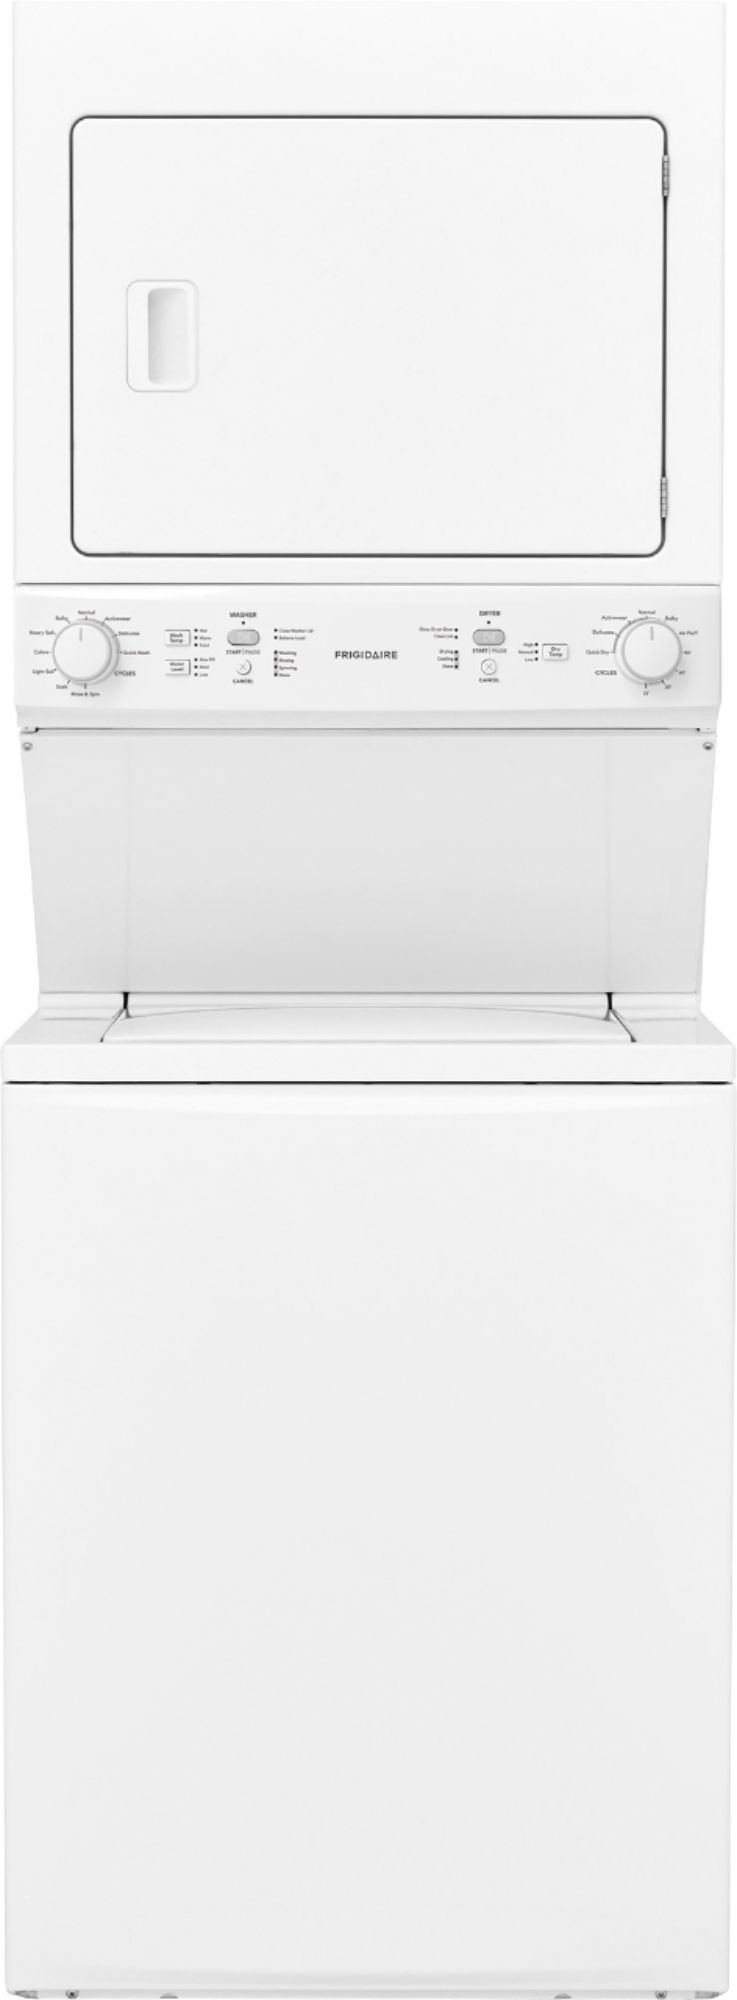 Frigidaire Gallery Series : GLTF2940FS 27 Front-Load Washer with 3.5 cu.  ft. Capacity - White